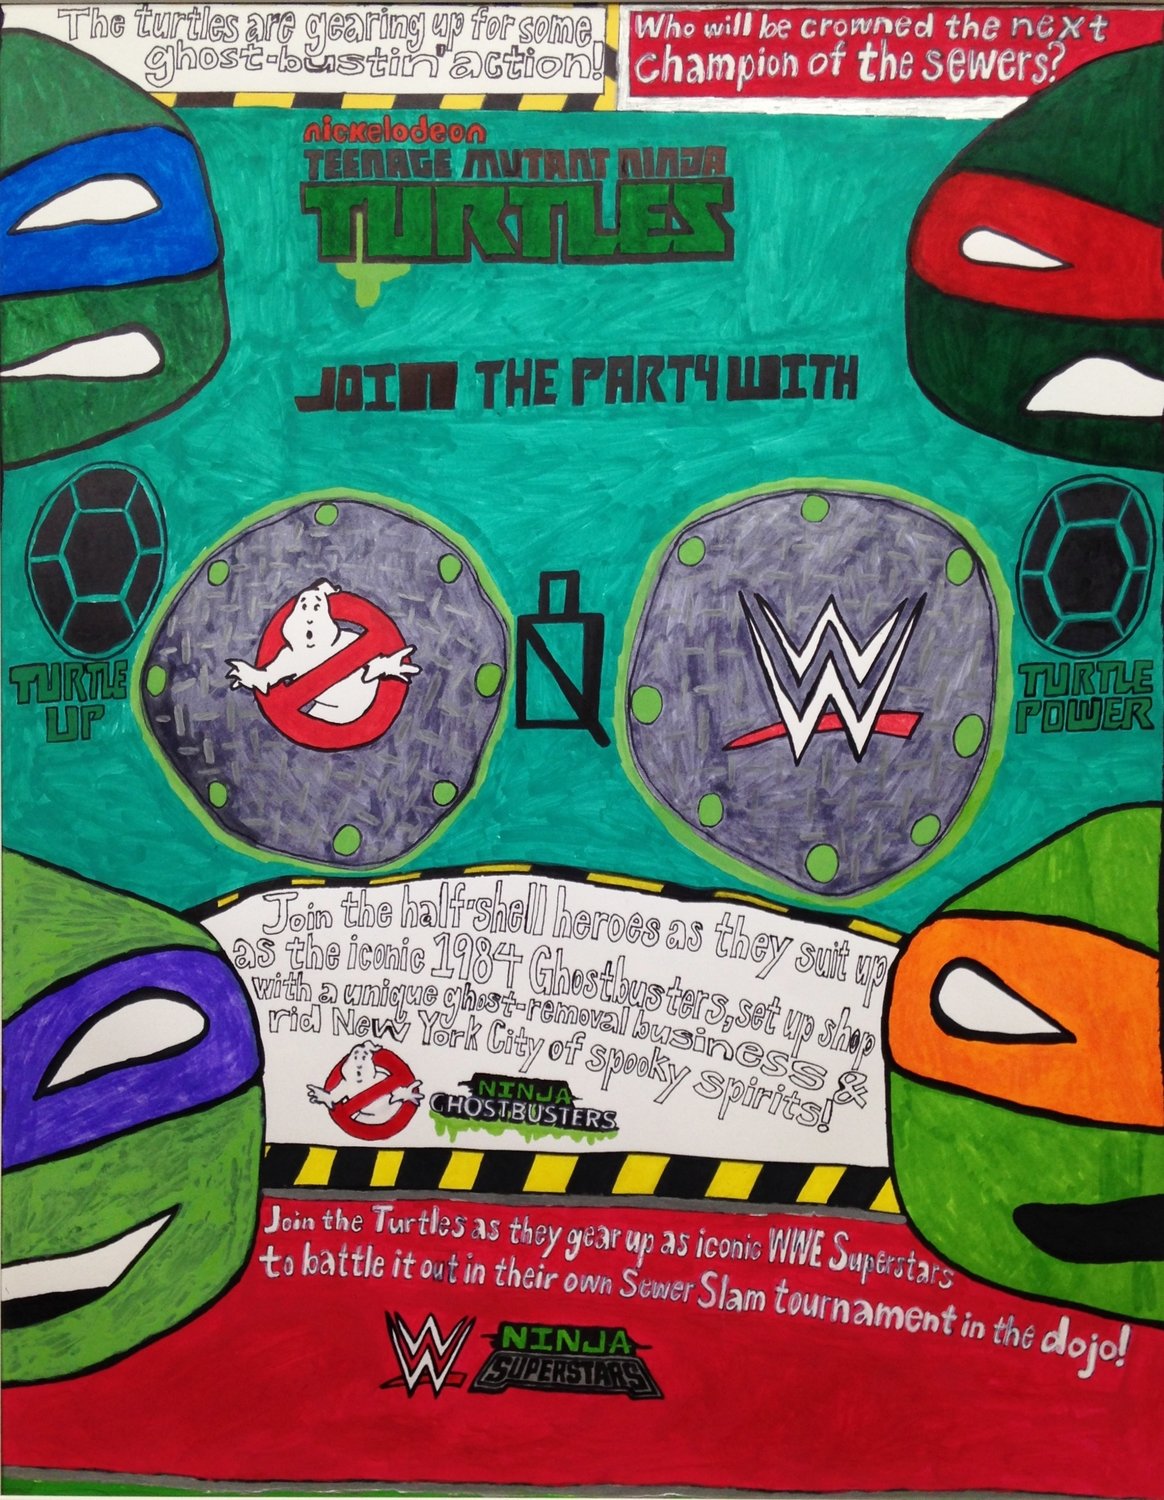 Teenage Mutant Ninja Turtles Join the Party with Ghostbusters and WWE